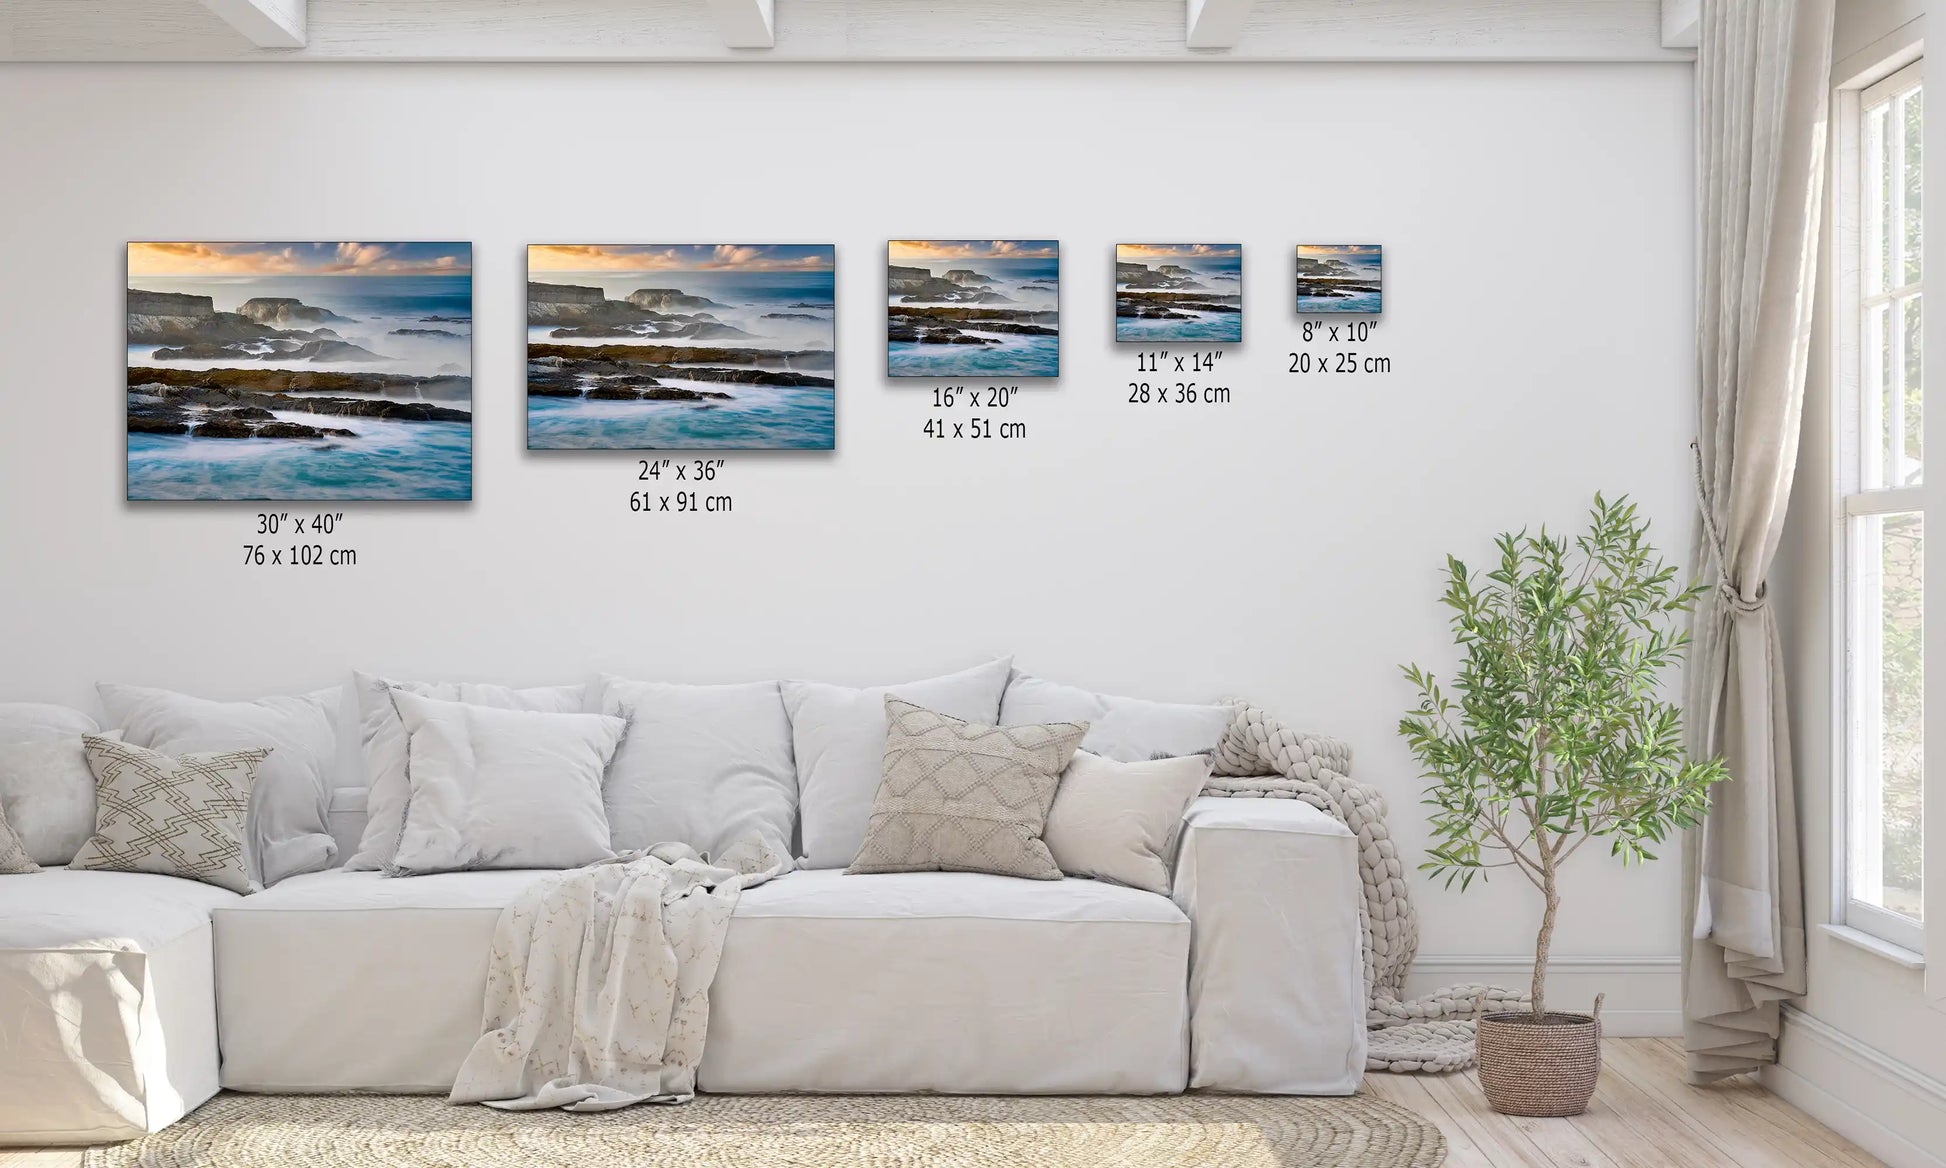 Size comparison chart of California Pacific Seascape wall art, offering a range of sizes to fit any space, with the soothing colors of the sea and sky.